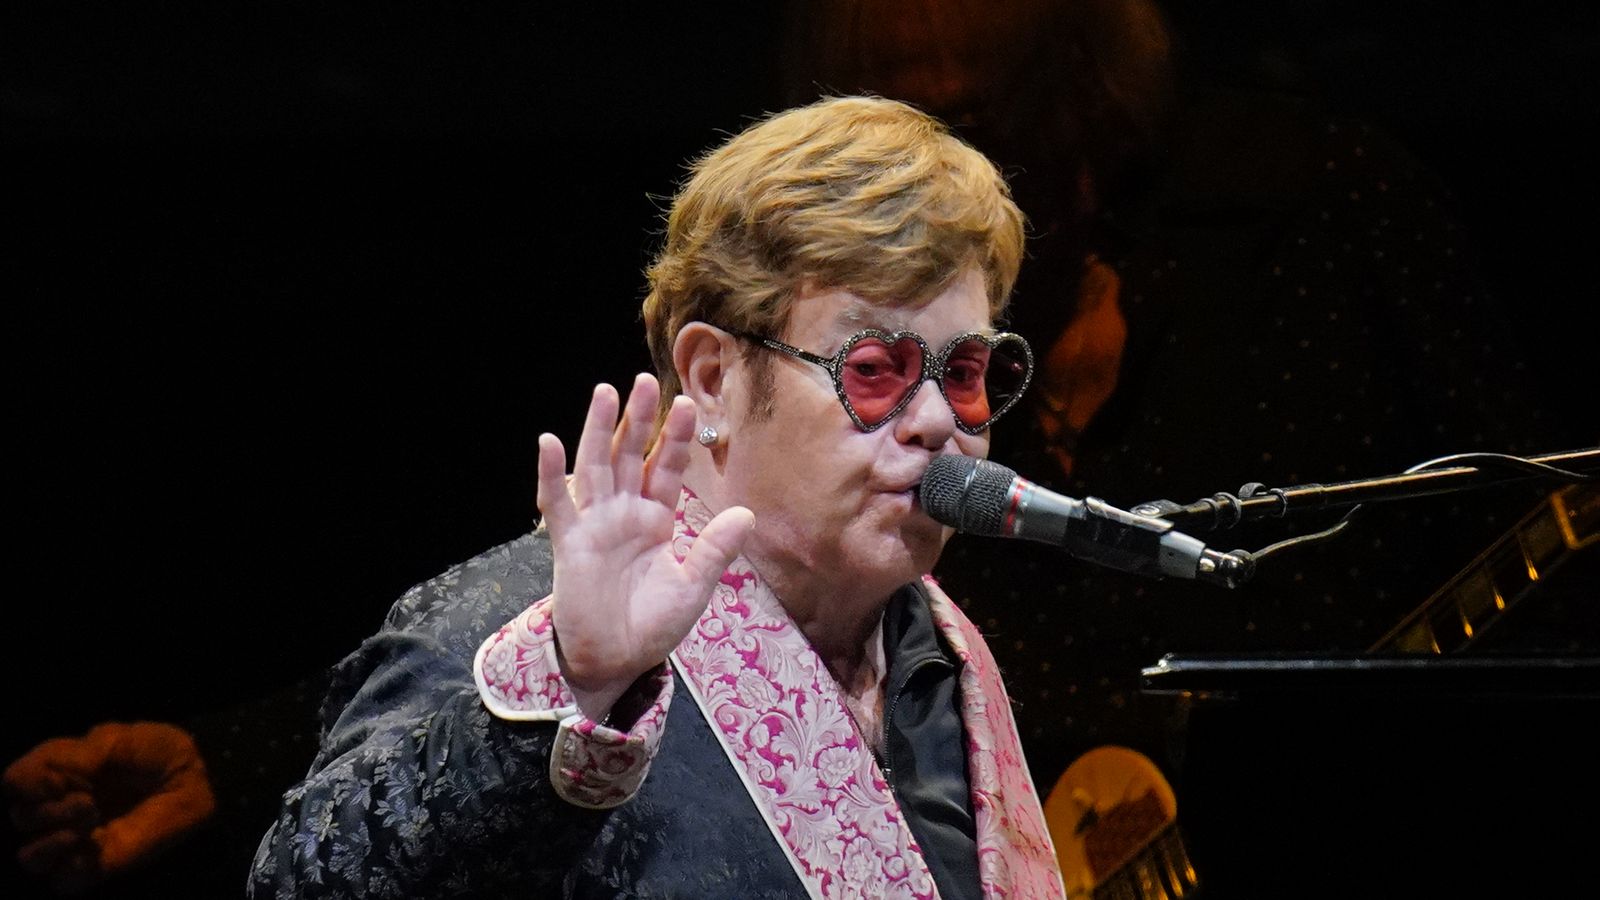 Elton John treated in hospital after falling at home in France